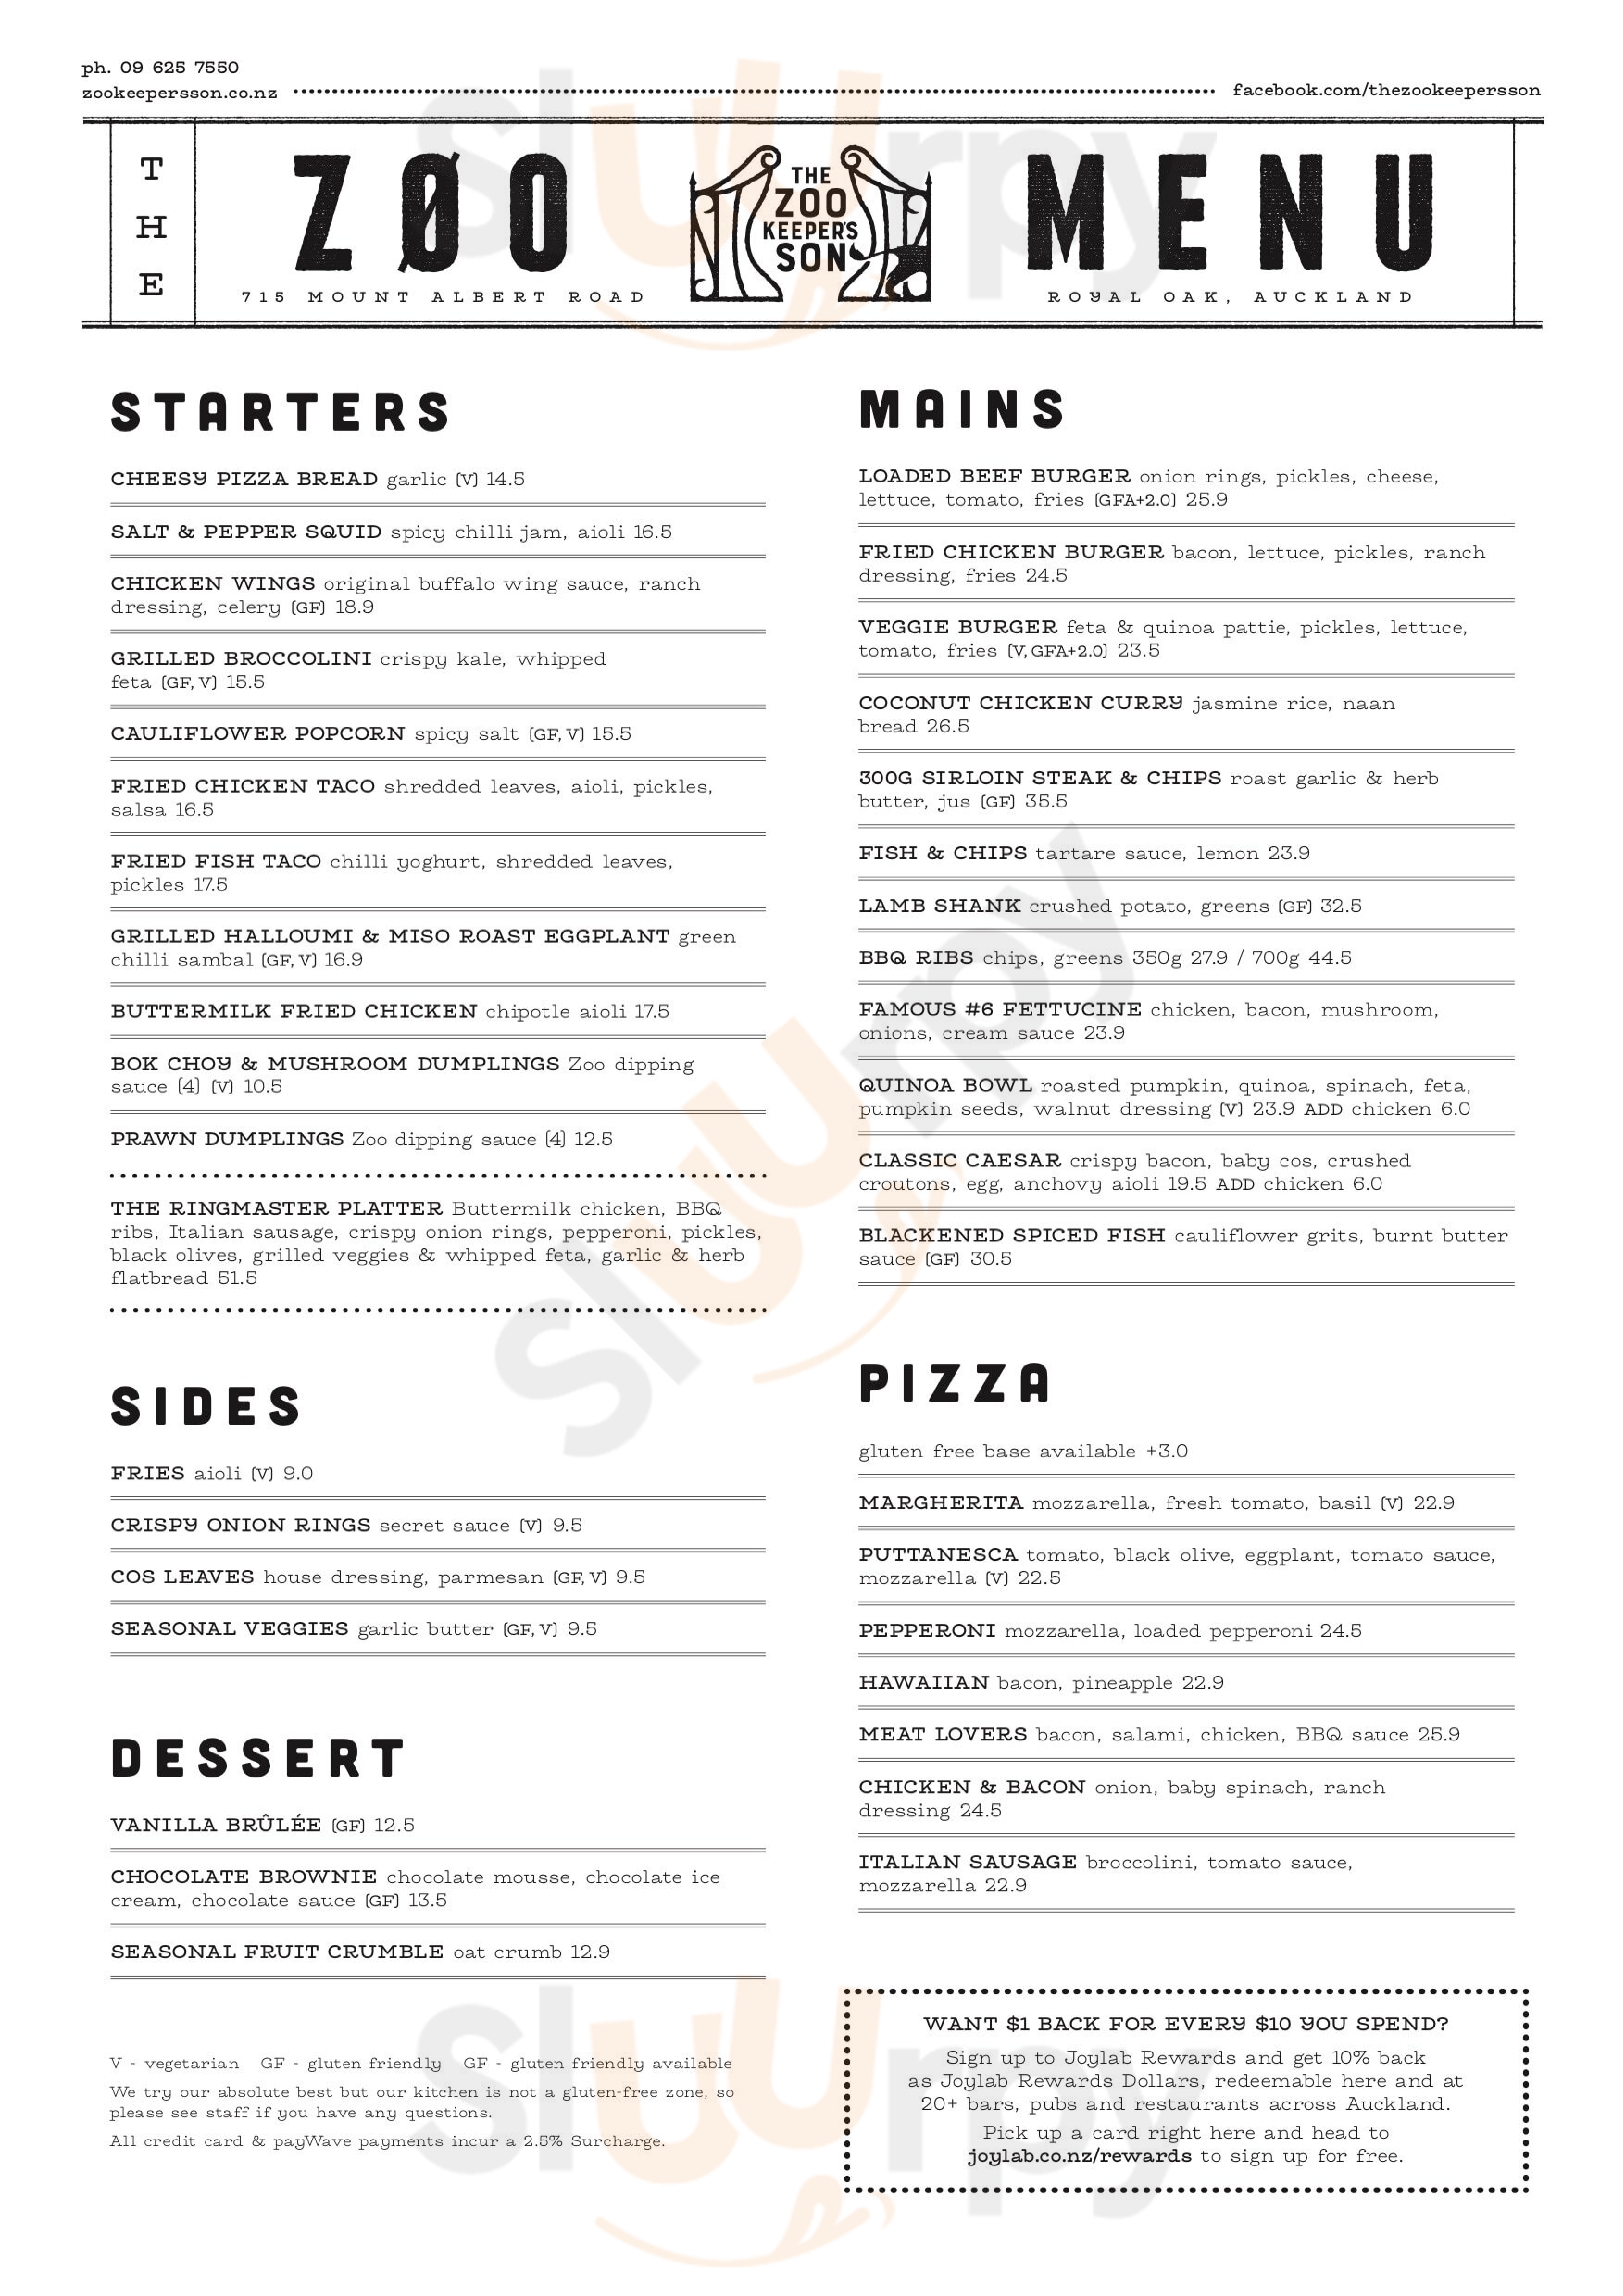 The Zookeepers Son Auckland Central Menu - 1